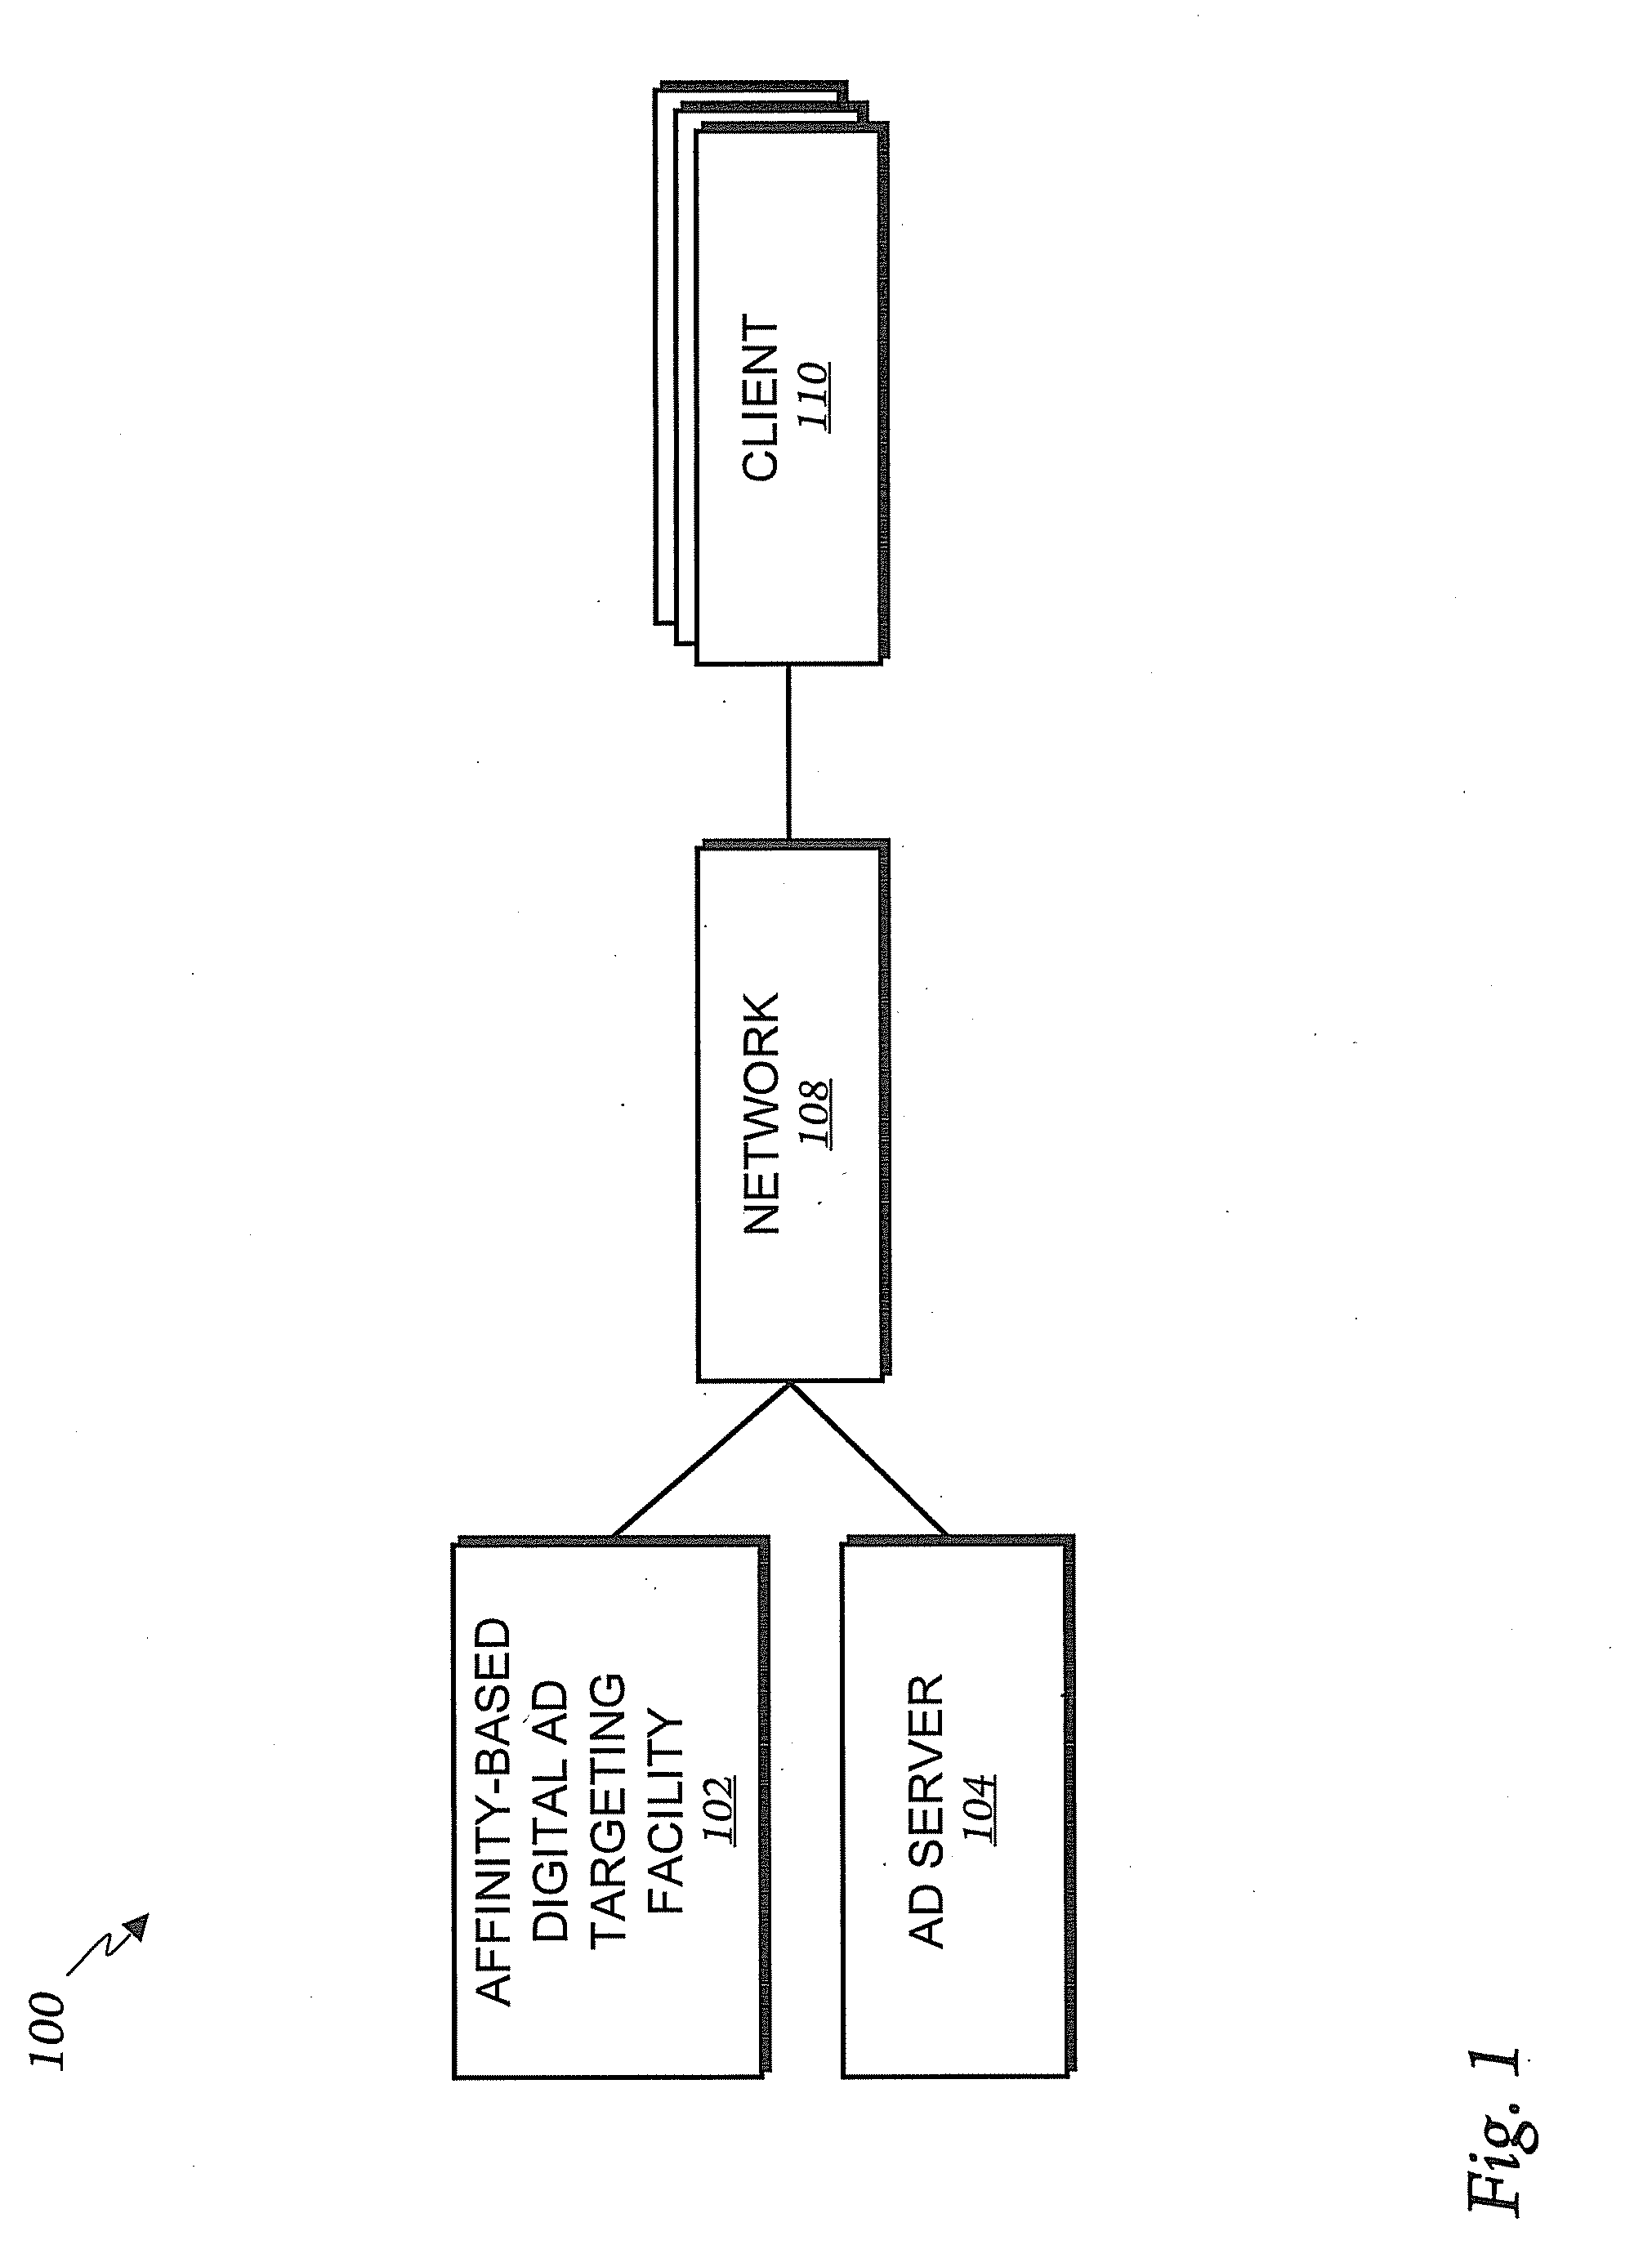 Systems and Methods Related to Delivering Targeted Advertising to Consumers